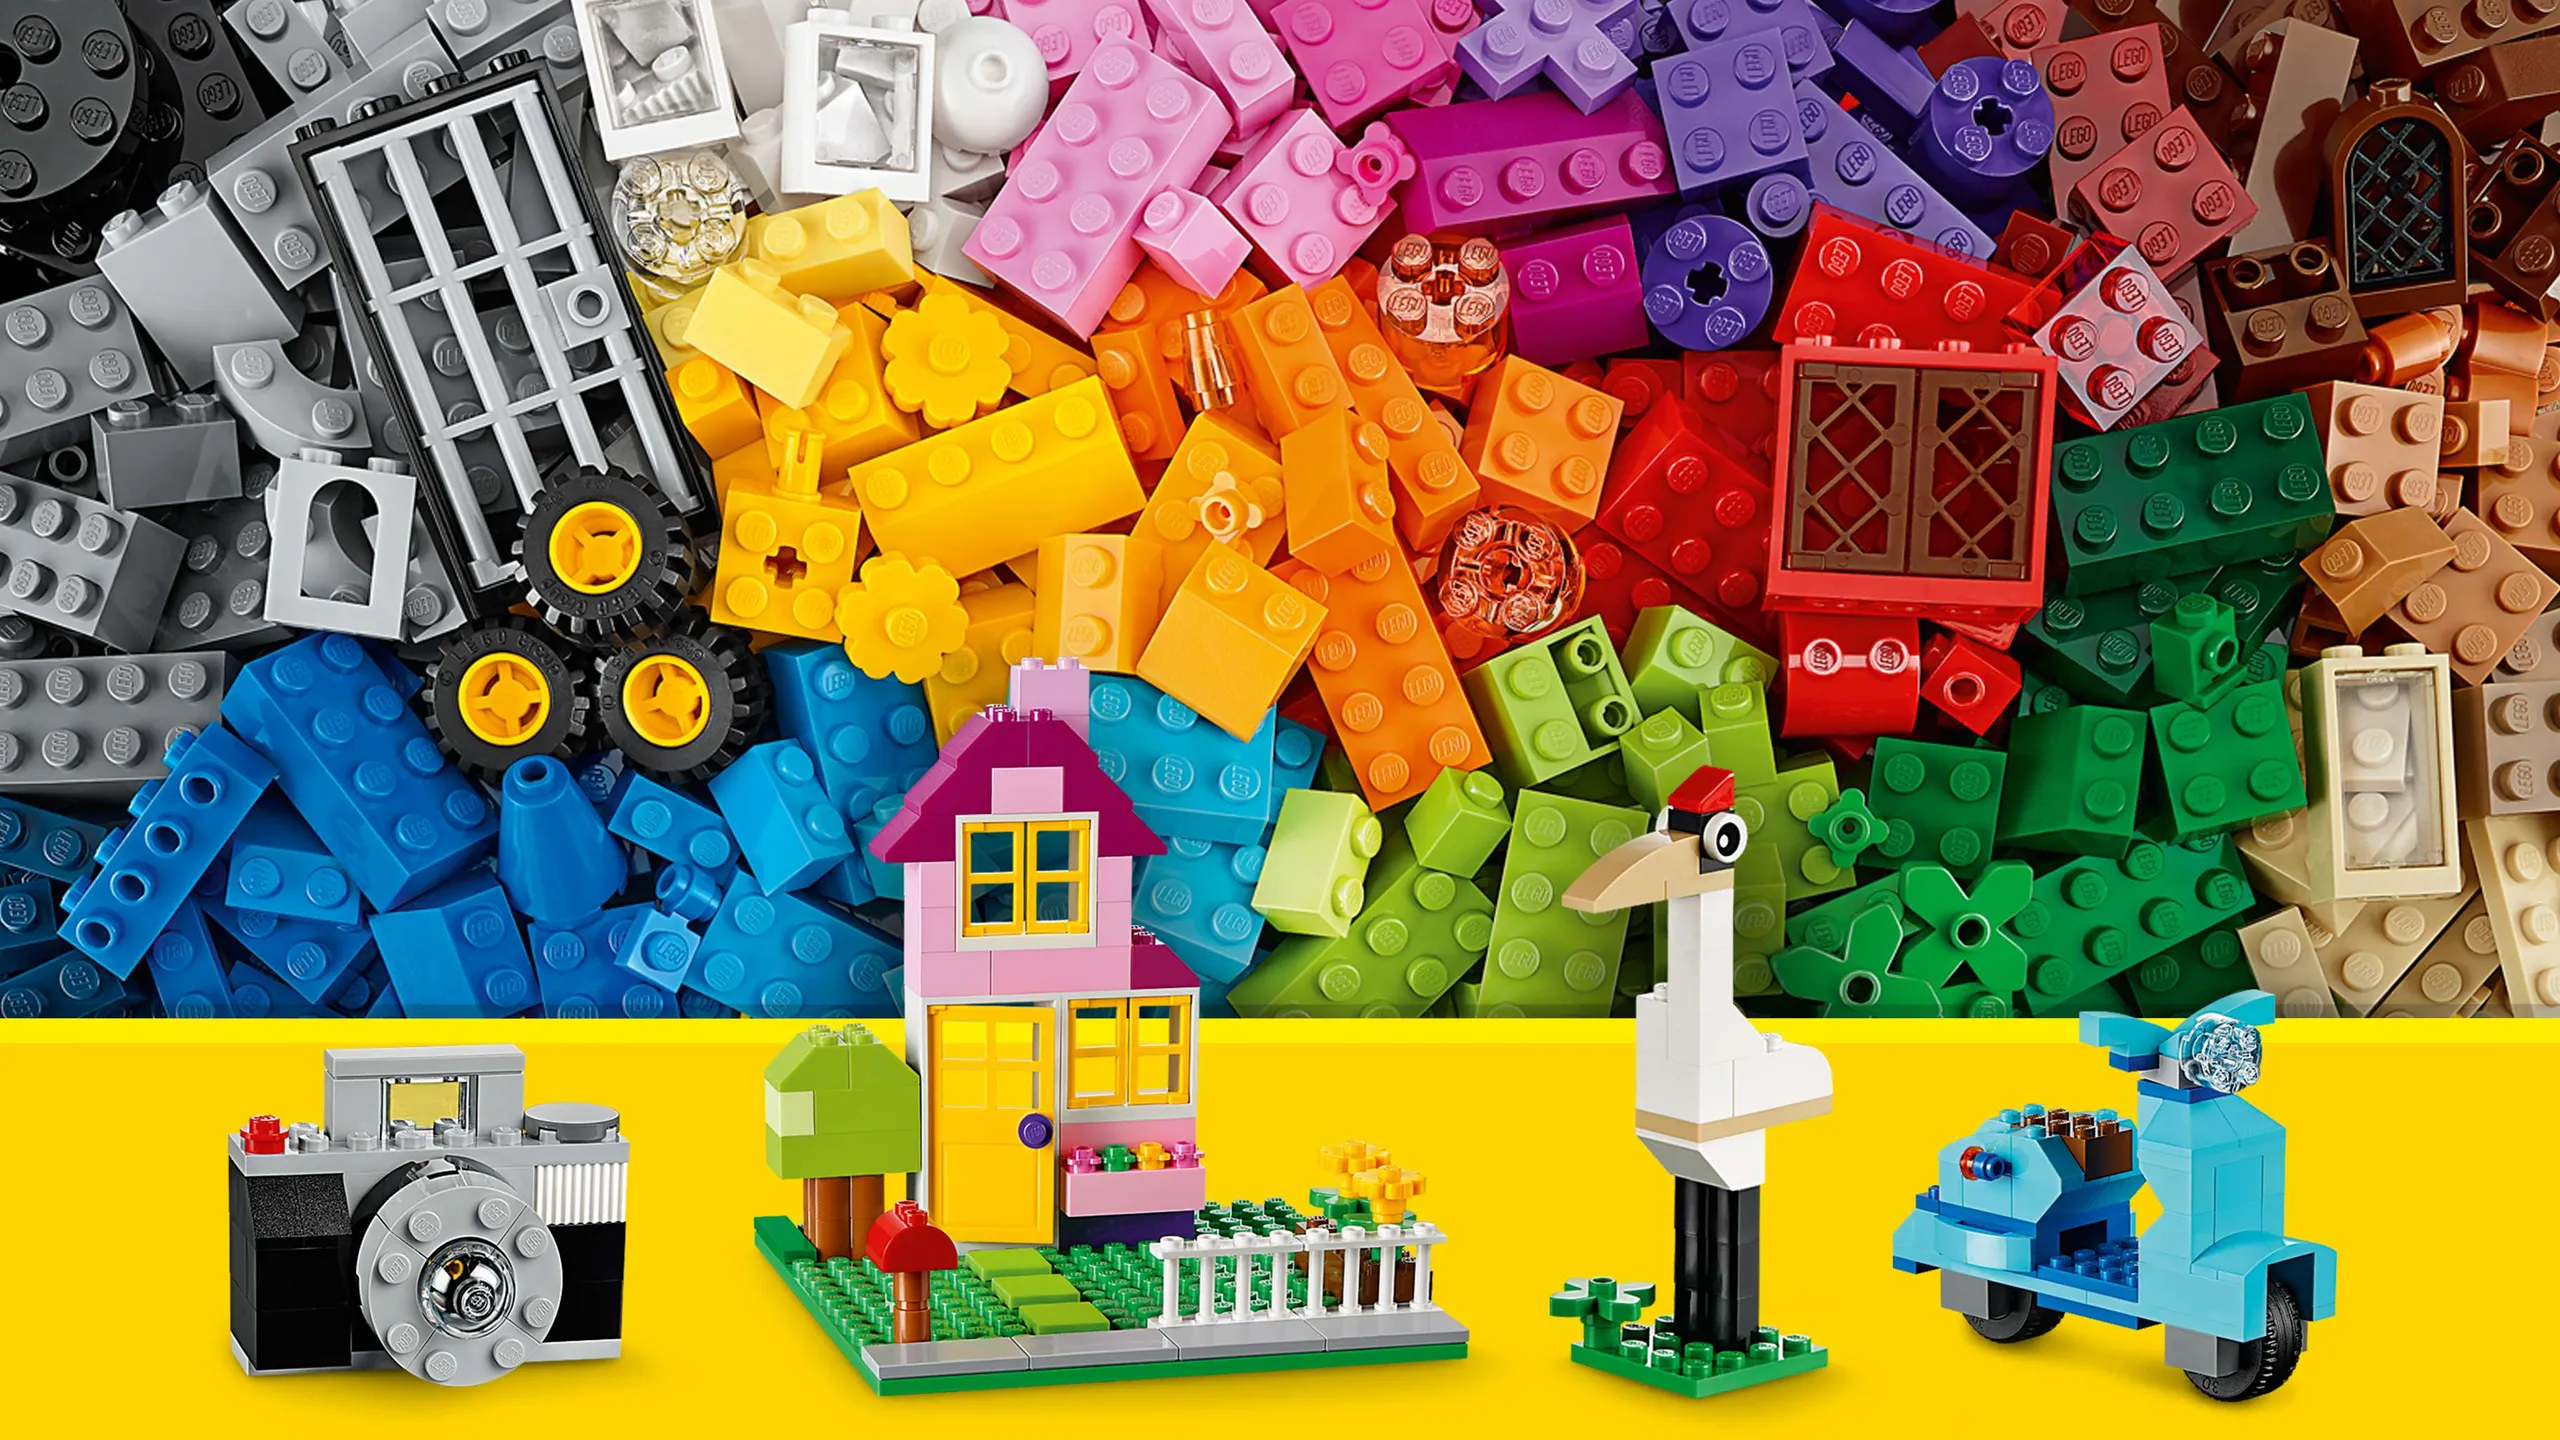 LEGO Classic Large Creative Brick Box - 10698 - Use a mix of blue, pink and white bricks to build a scooter, a house, a camera or a crane bird!